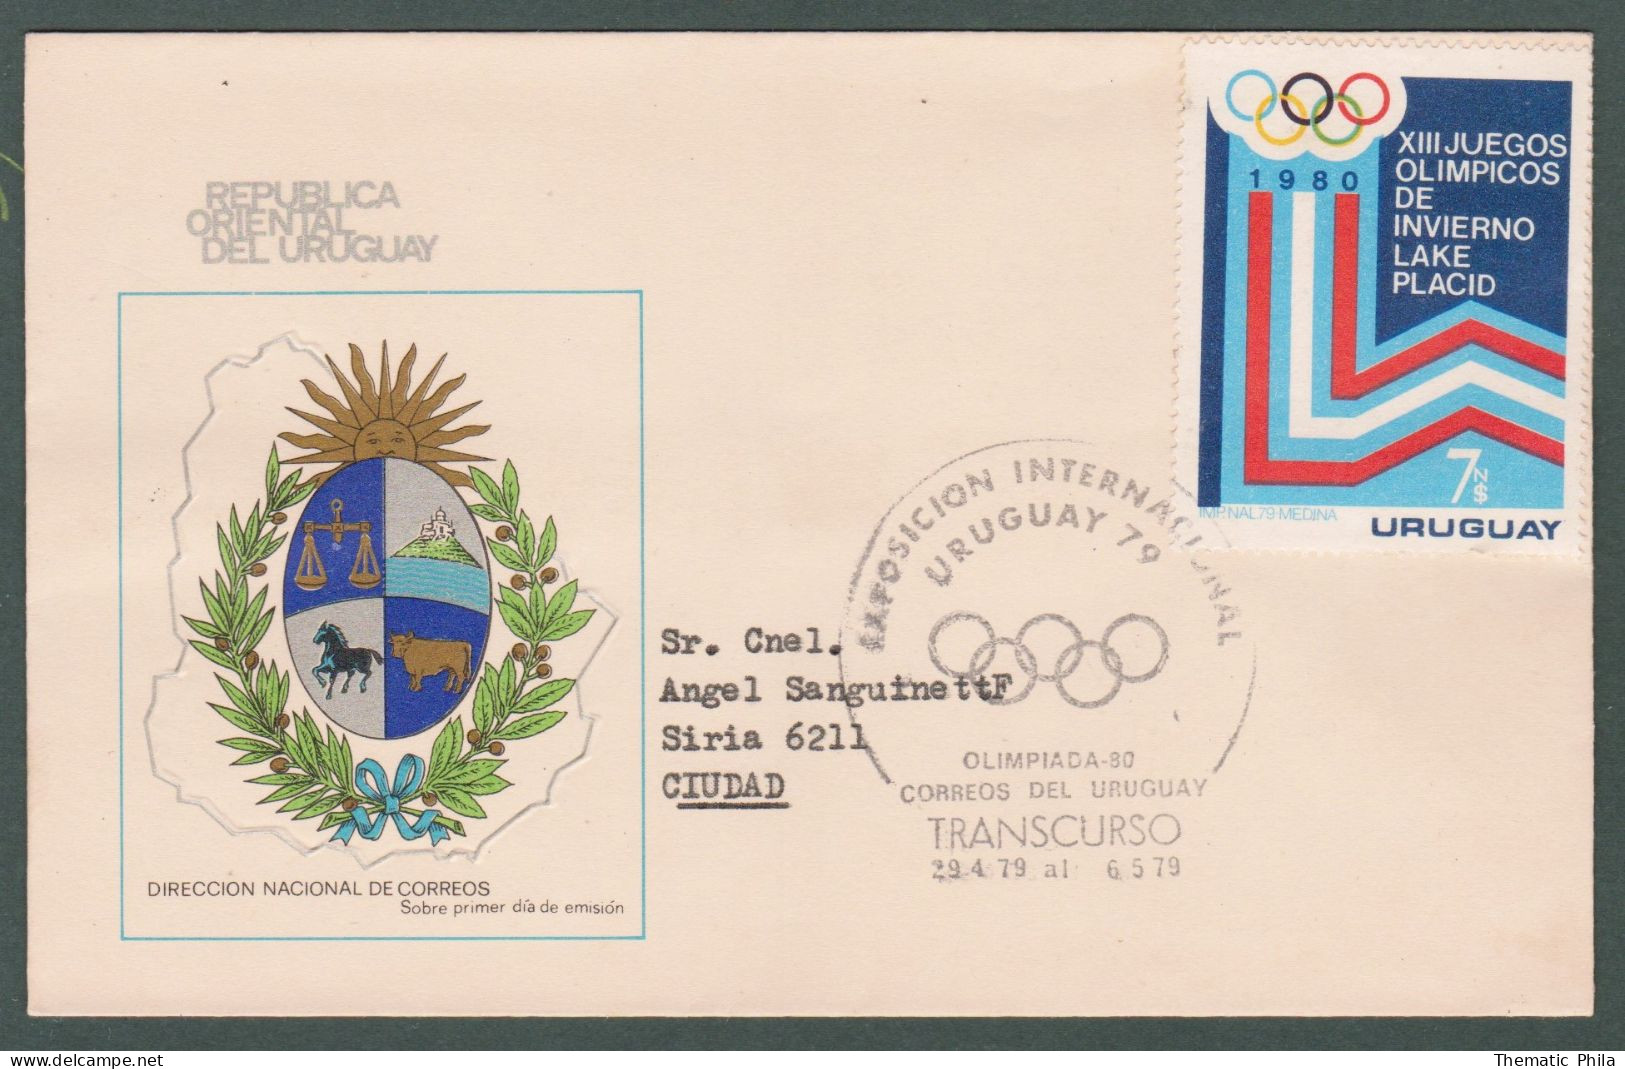 1979 URUGUAY Special Postmark Transcurso Expo International Olympic Games -Comité International Olympique - Hiver 1980: Lake Placid